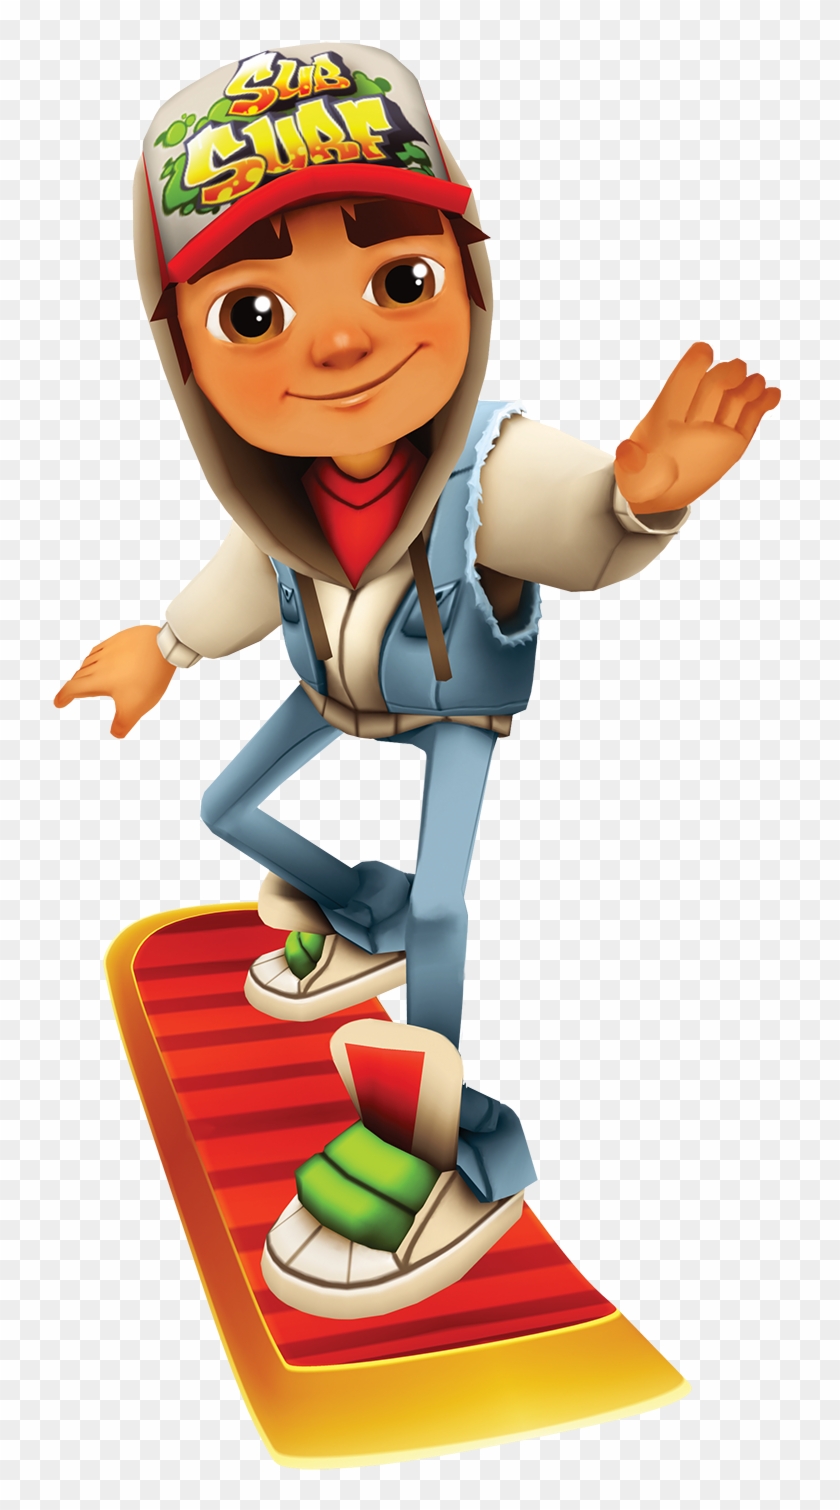 download subway surfers apk android